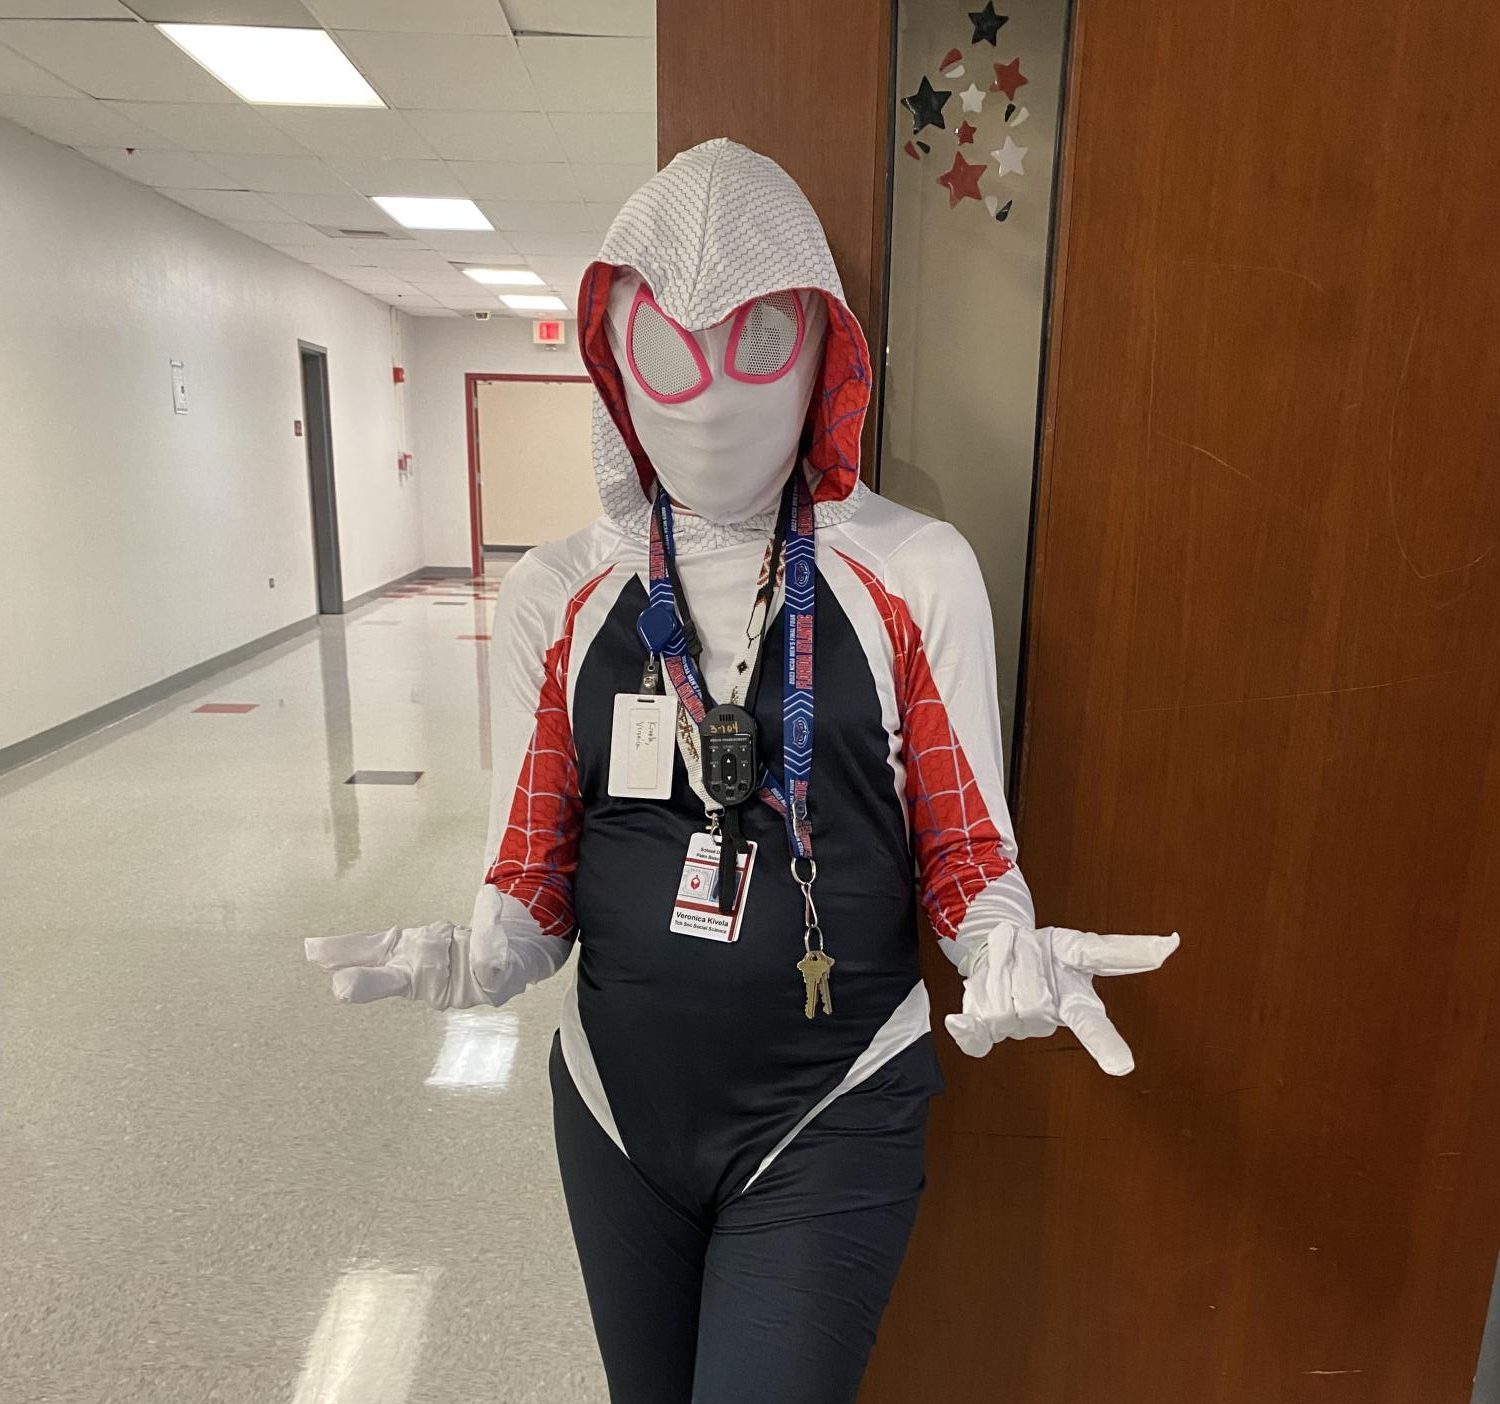 Ms.Kivela in front of her classroom wearing her Spiderman costume.